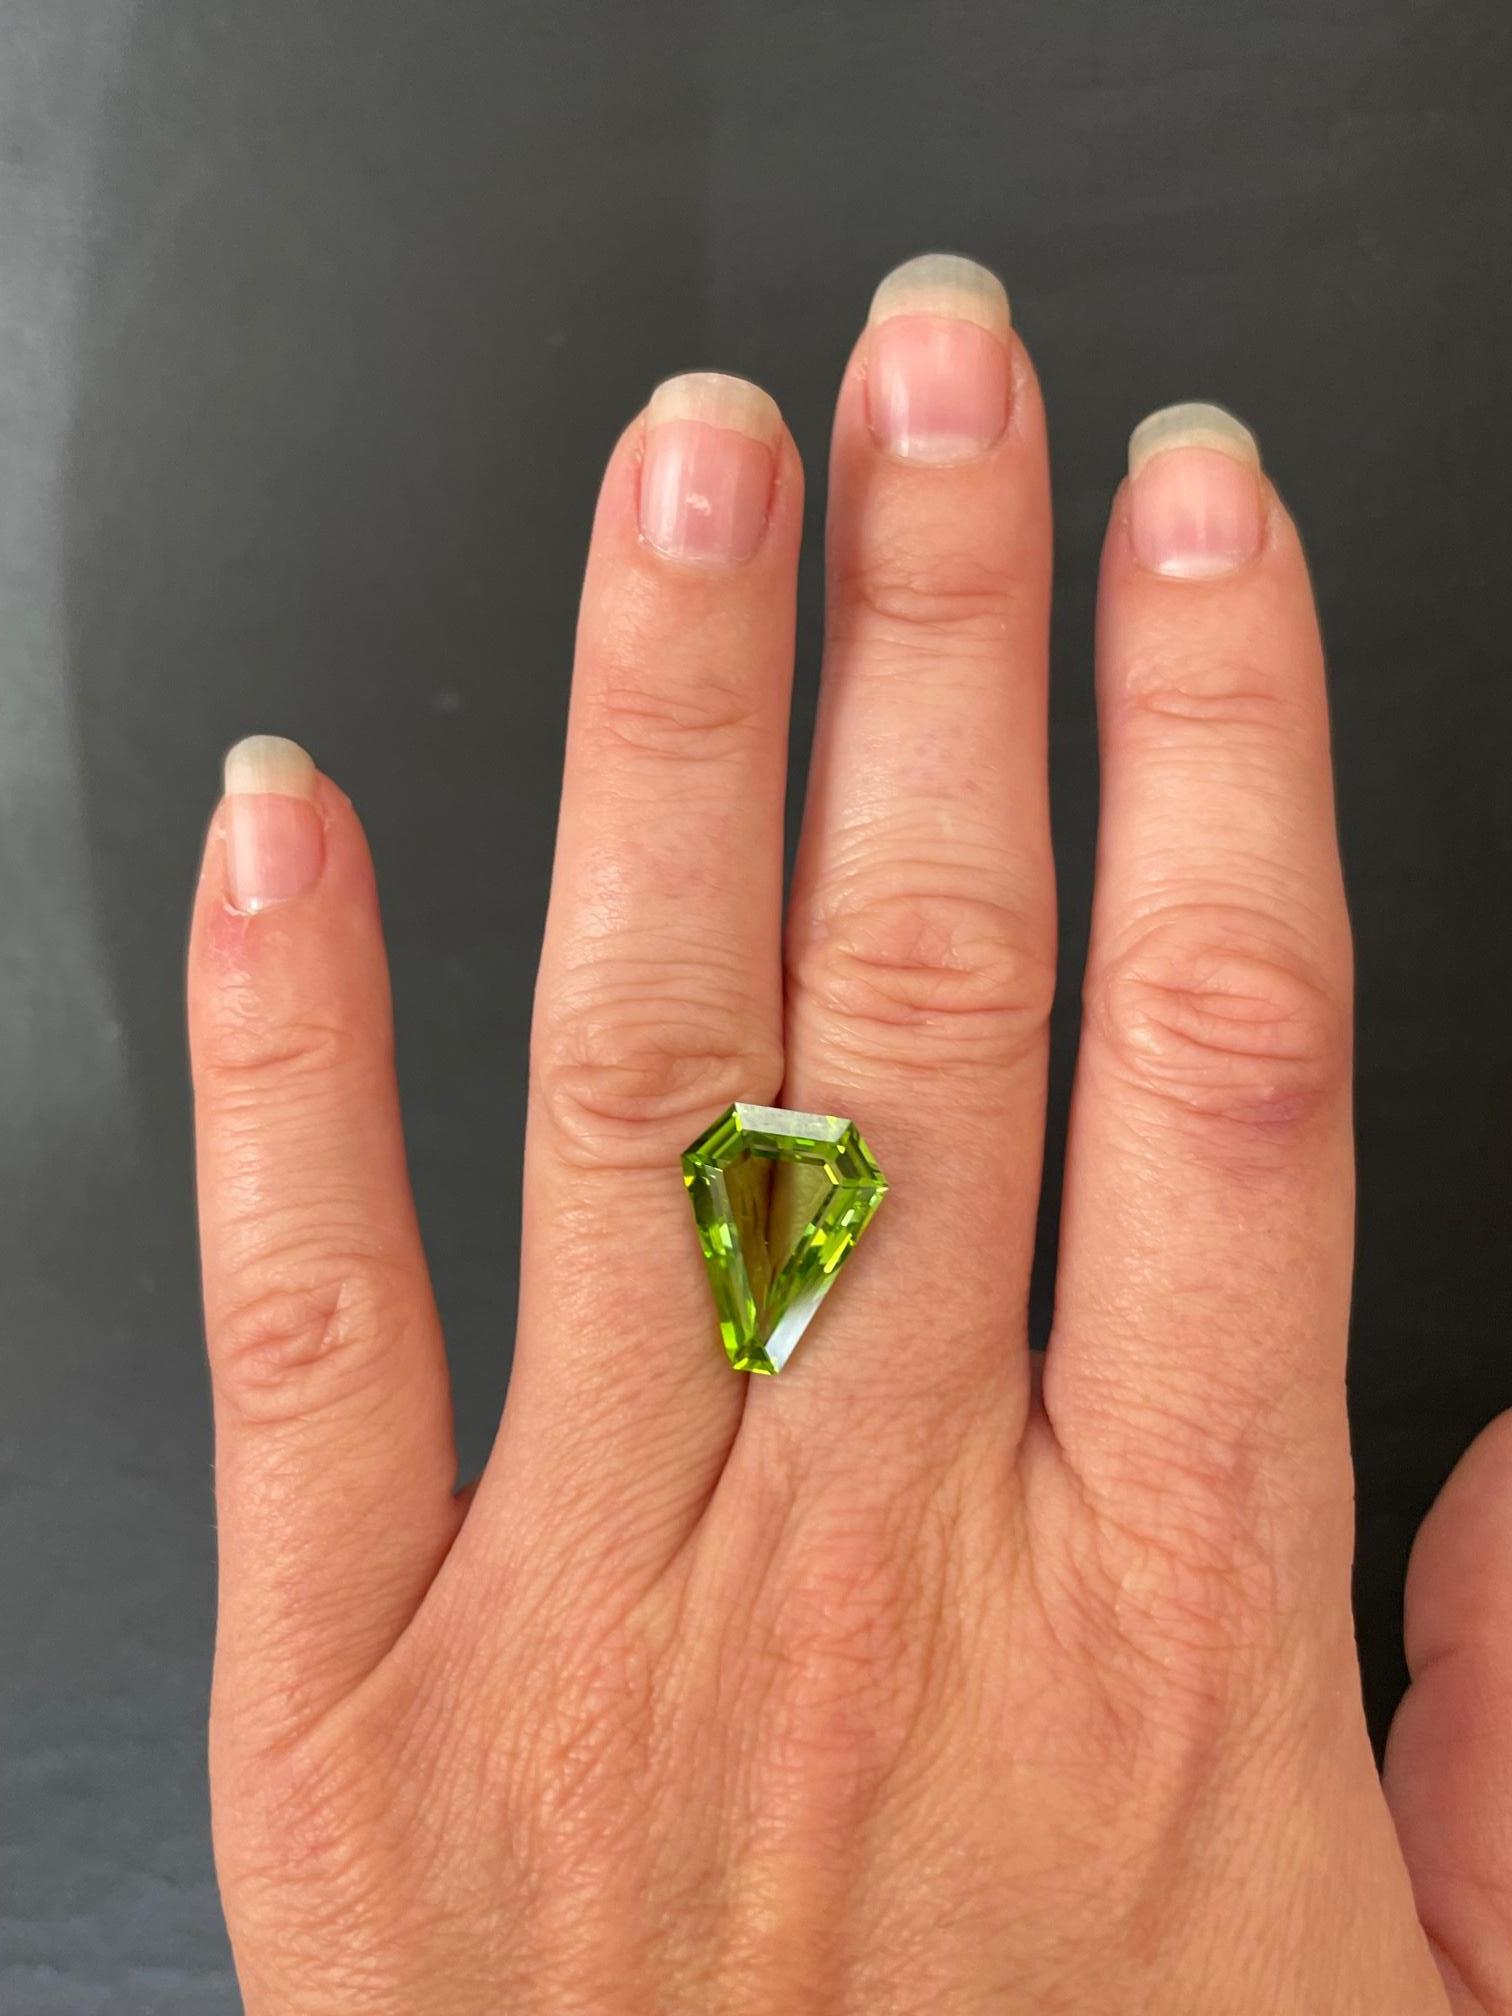 Special 8.54 carat Mint Peridot shield shaped gem, offered unmounted to a fine gemstone lover.
Dimensions: 16.70mm x 13.50mm x 5.40mm.
Returns are accepted and paid by us within 7 days of delivery.
We offer supreme custom jewelry work upon request.